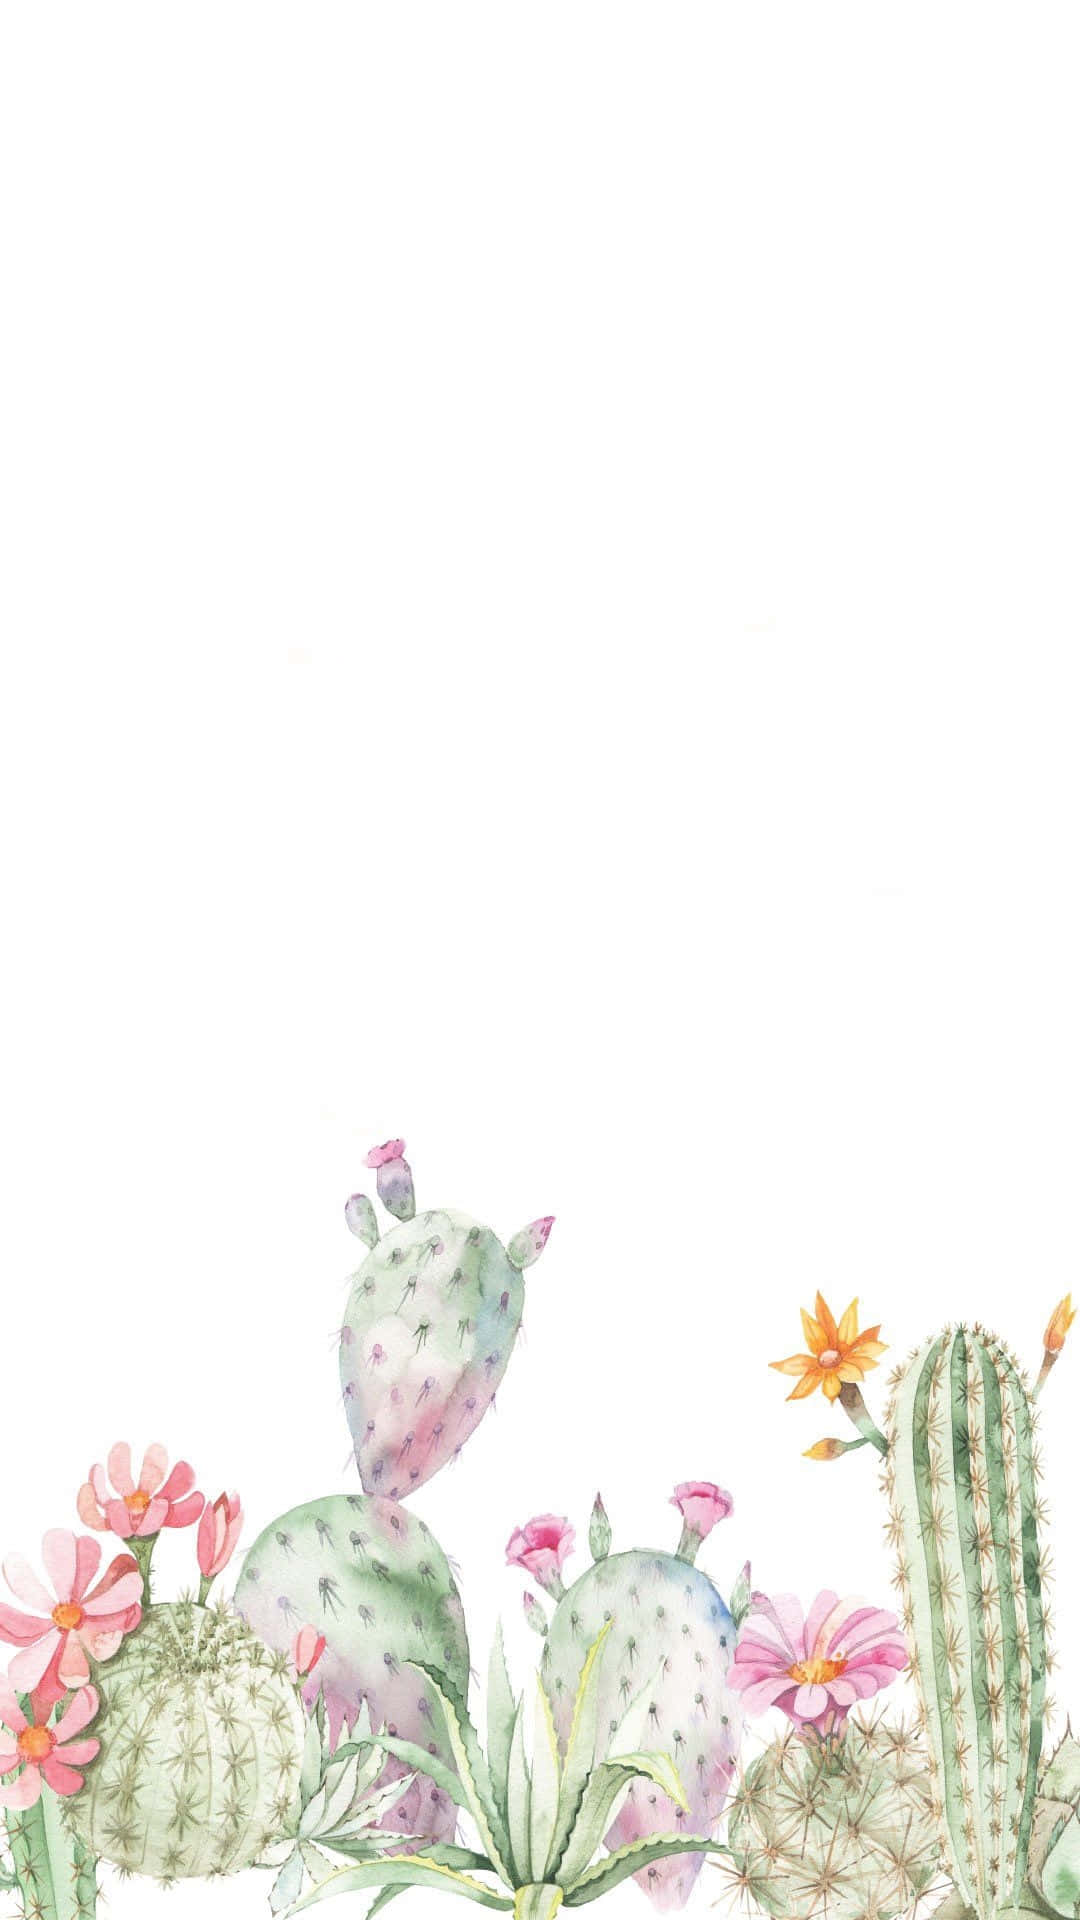 A Cute Cactus Ready To Brighten Up Your Home